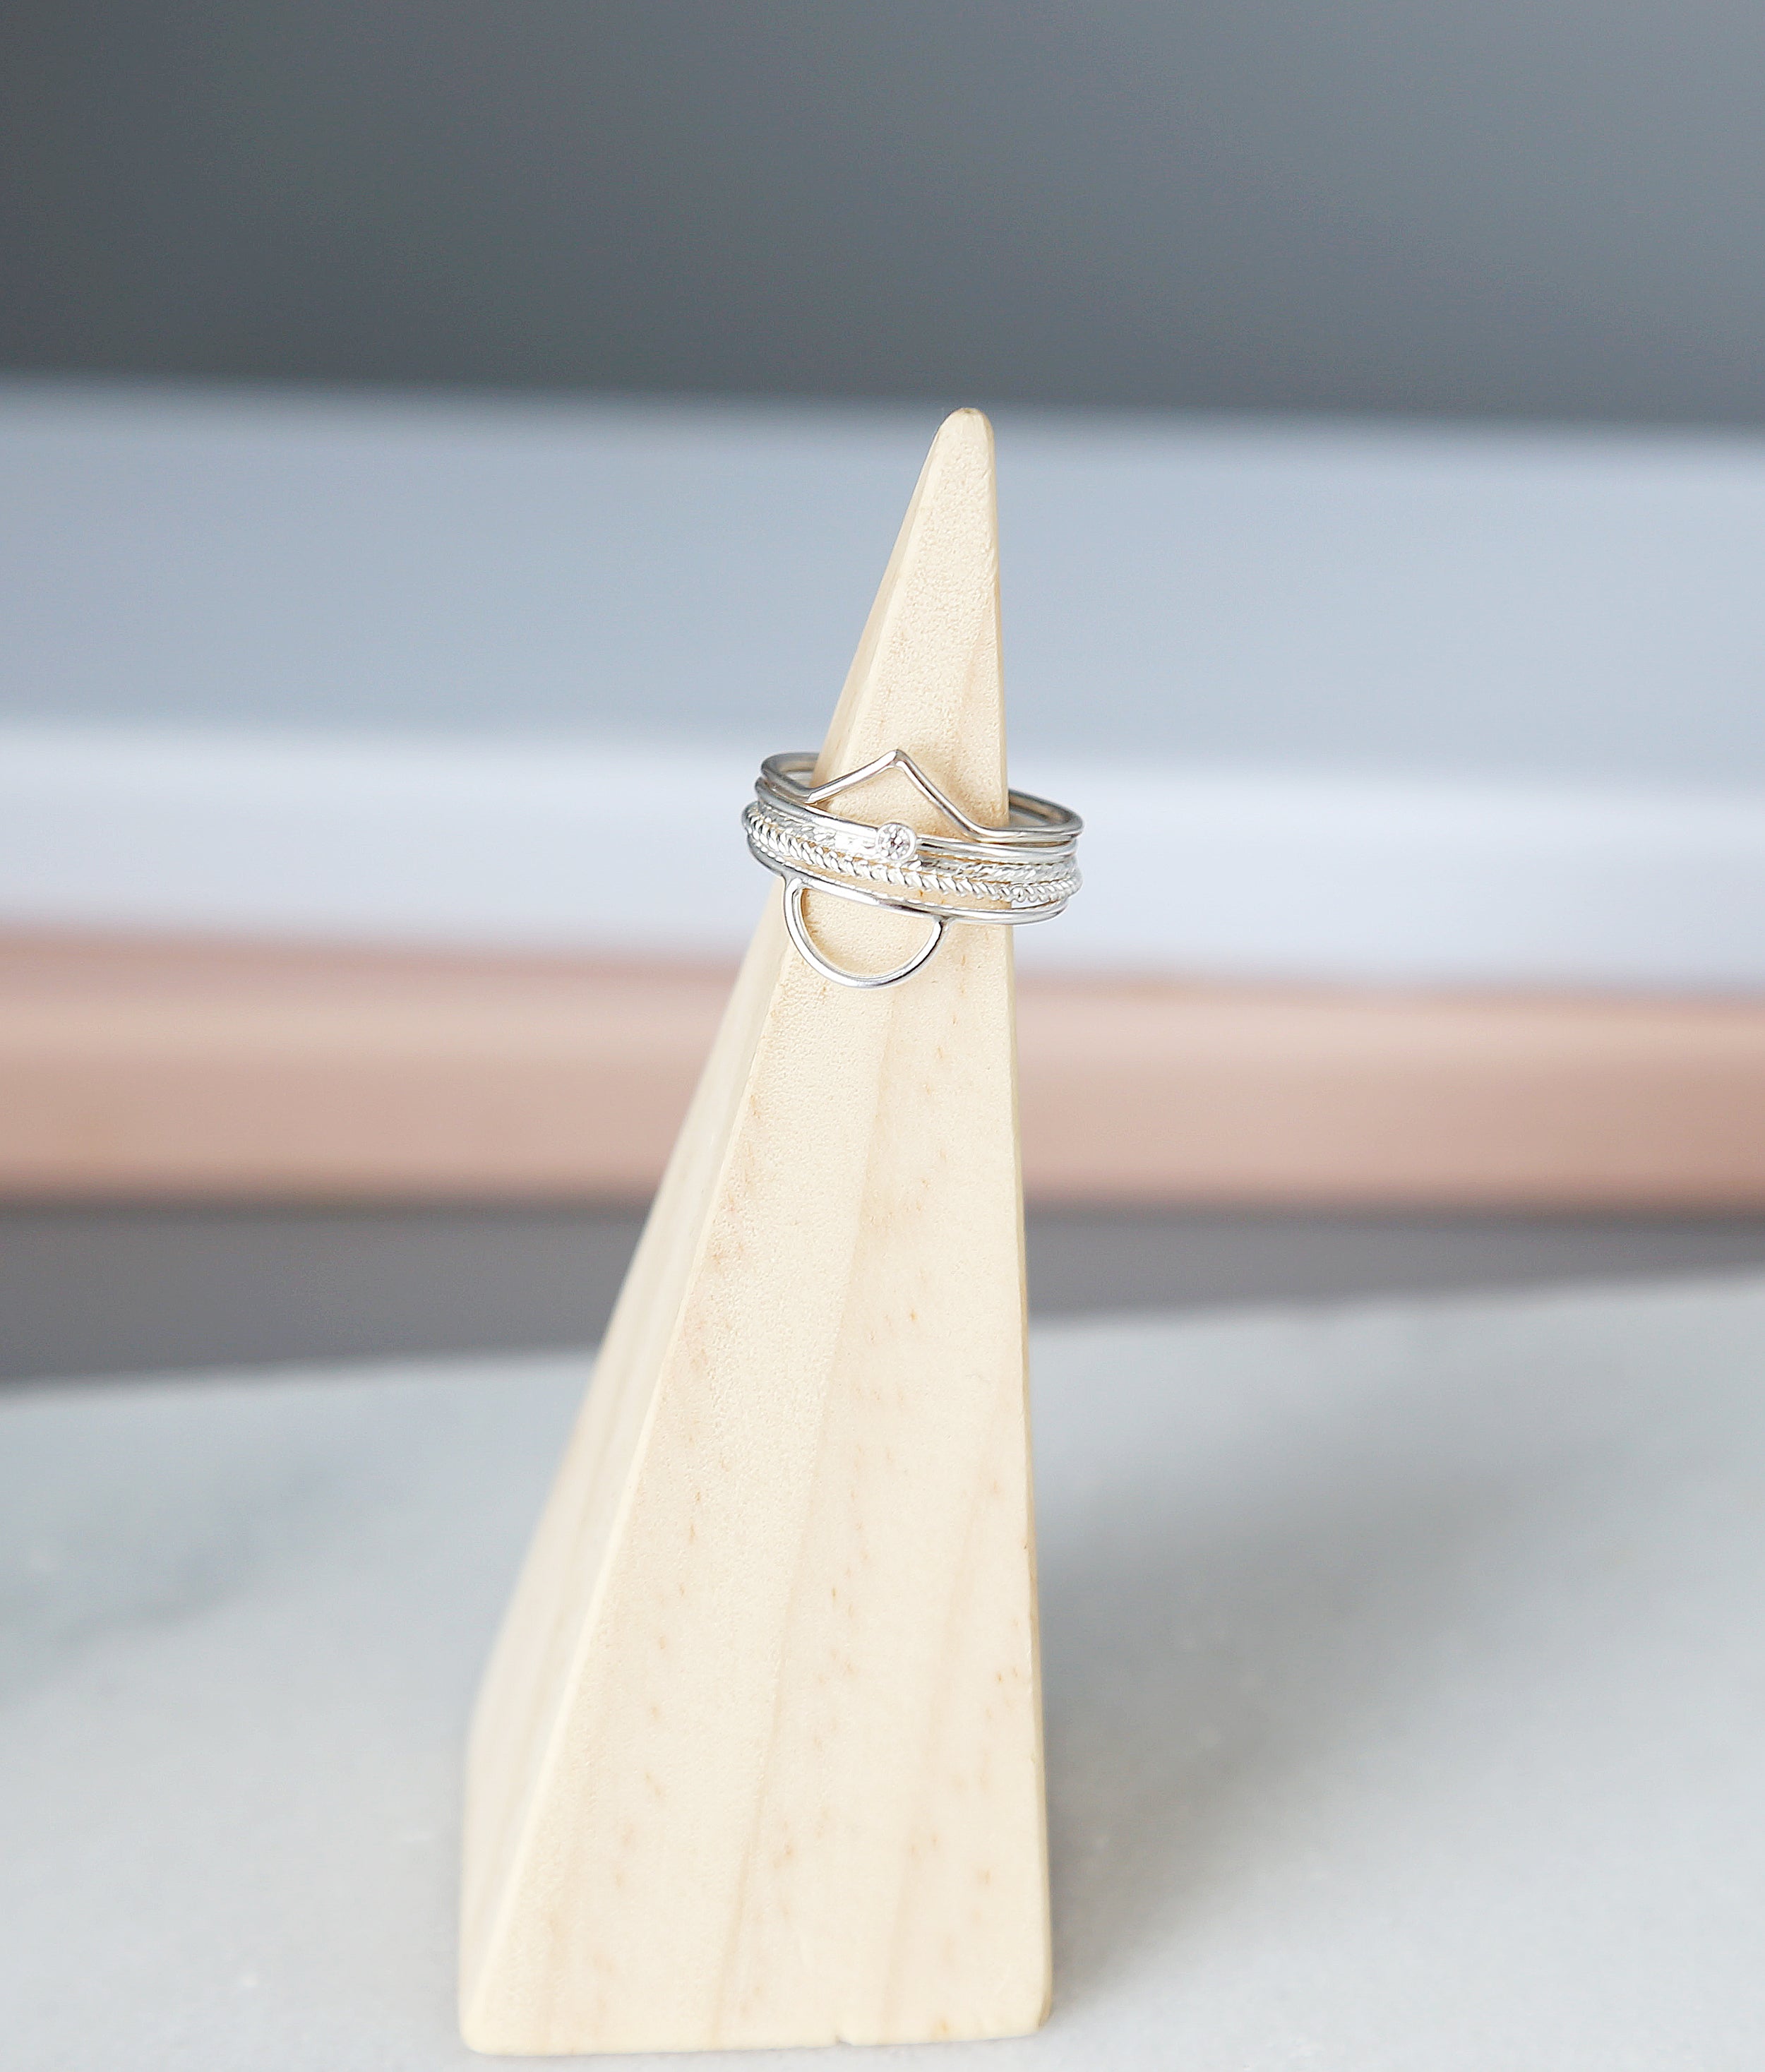 Minimalist Sterling Silver Rings, Stacking Rings, Sparkle Rings, Simple Boho Silver Jewelry